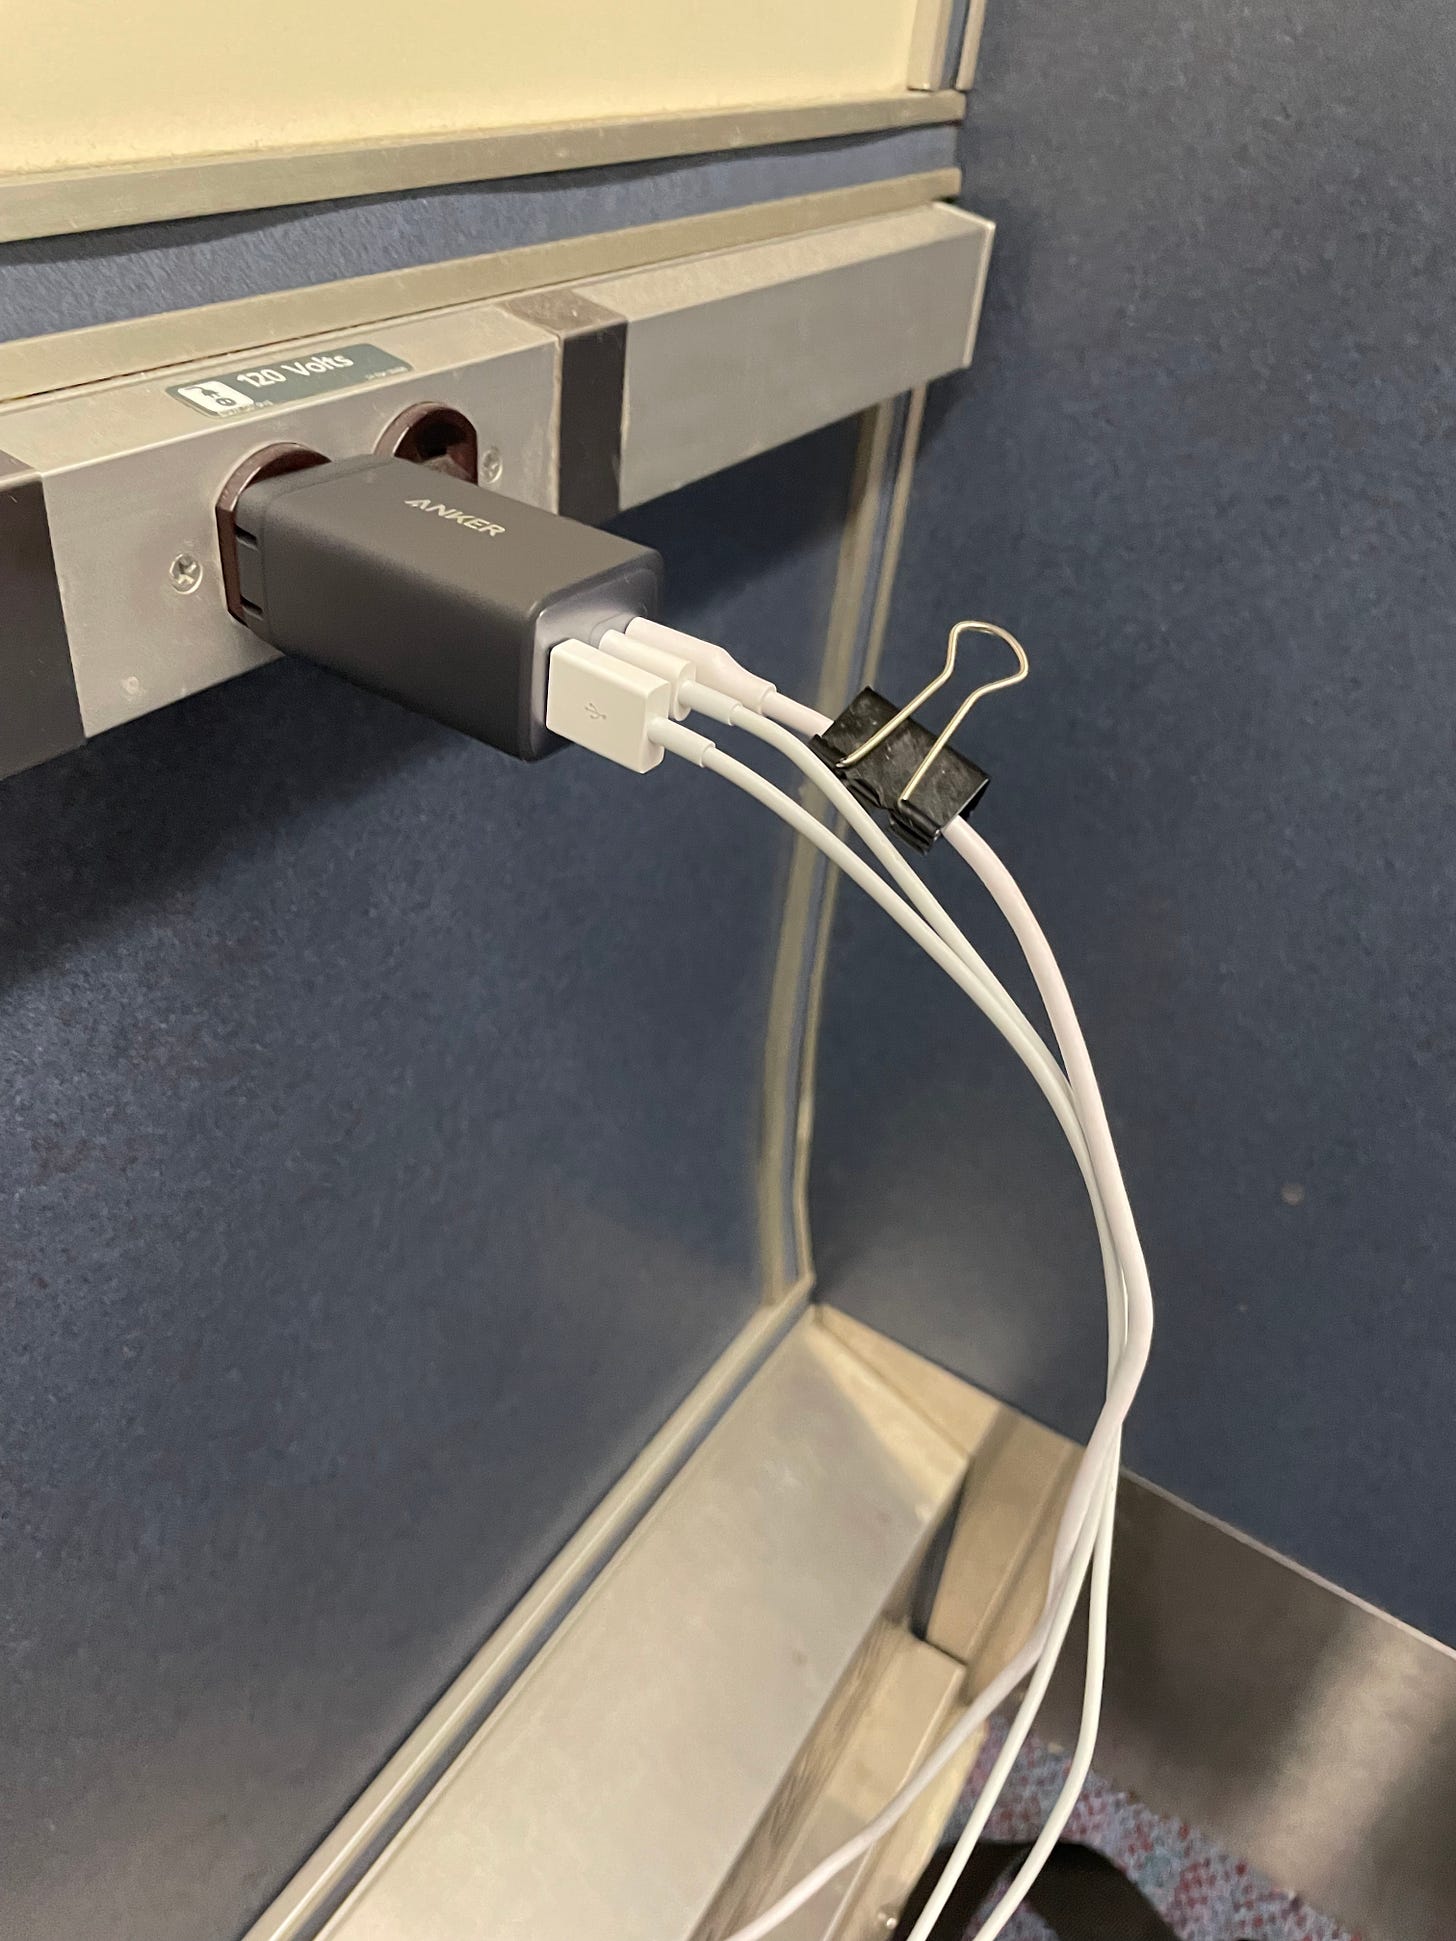 Phone charger plugged into an outlet next to a train seat.